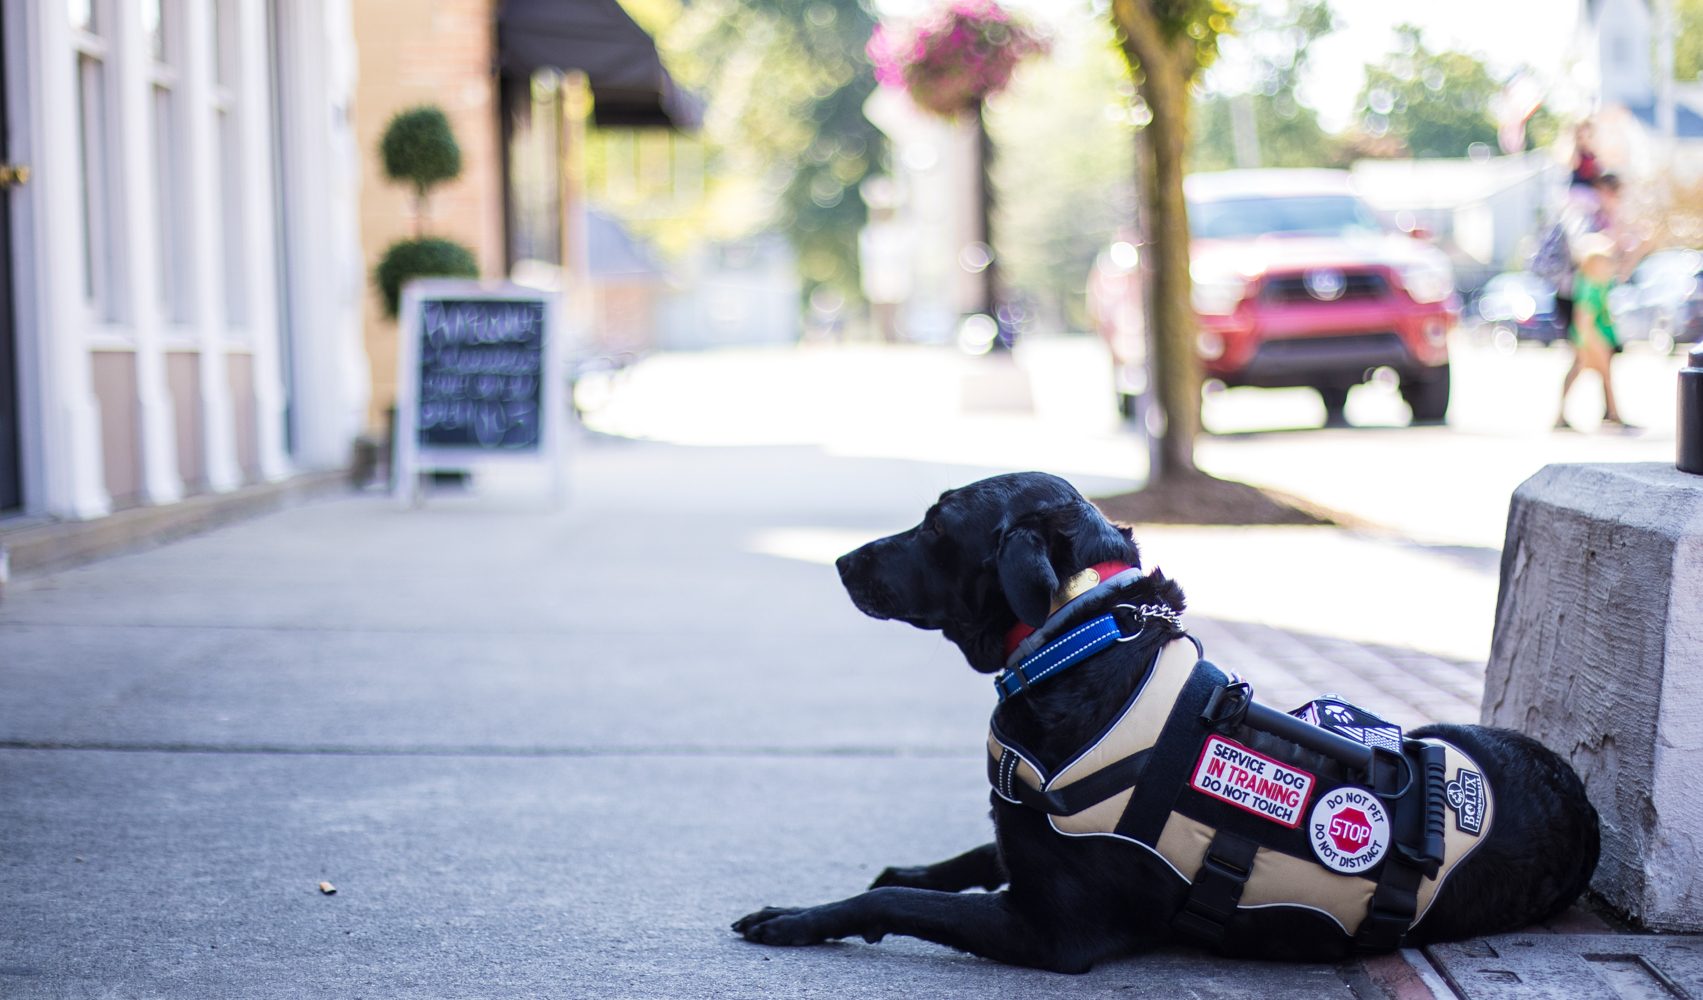 Service dog waits alone patiently for trainer in branding photo session